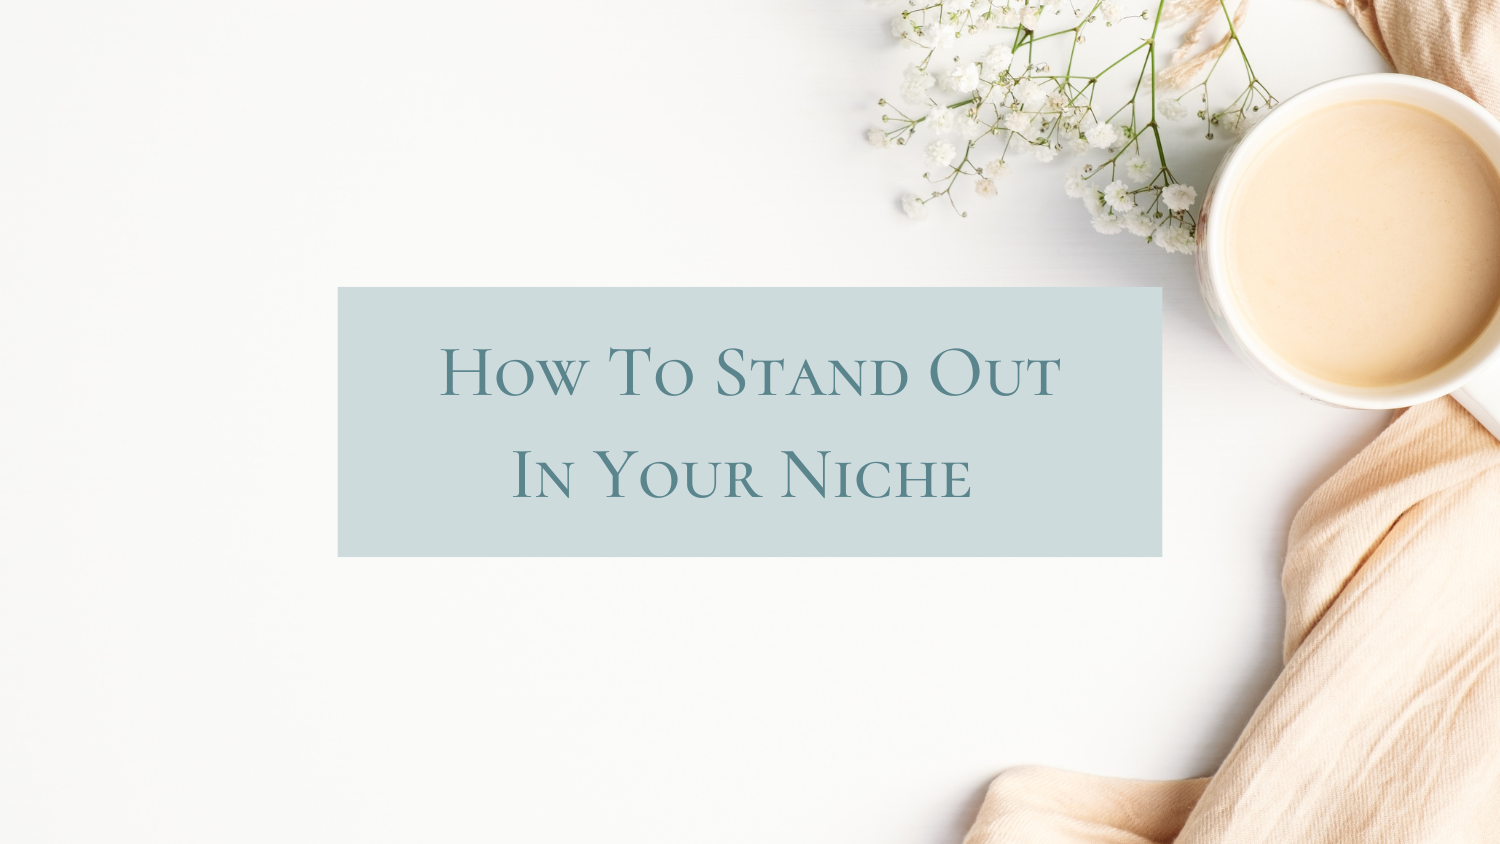 How To Stand Out In Your Niche